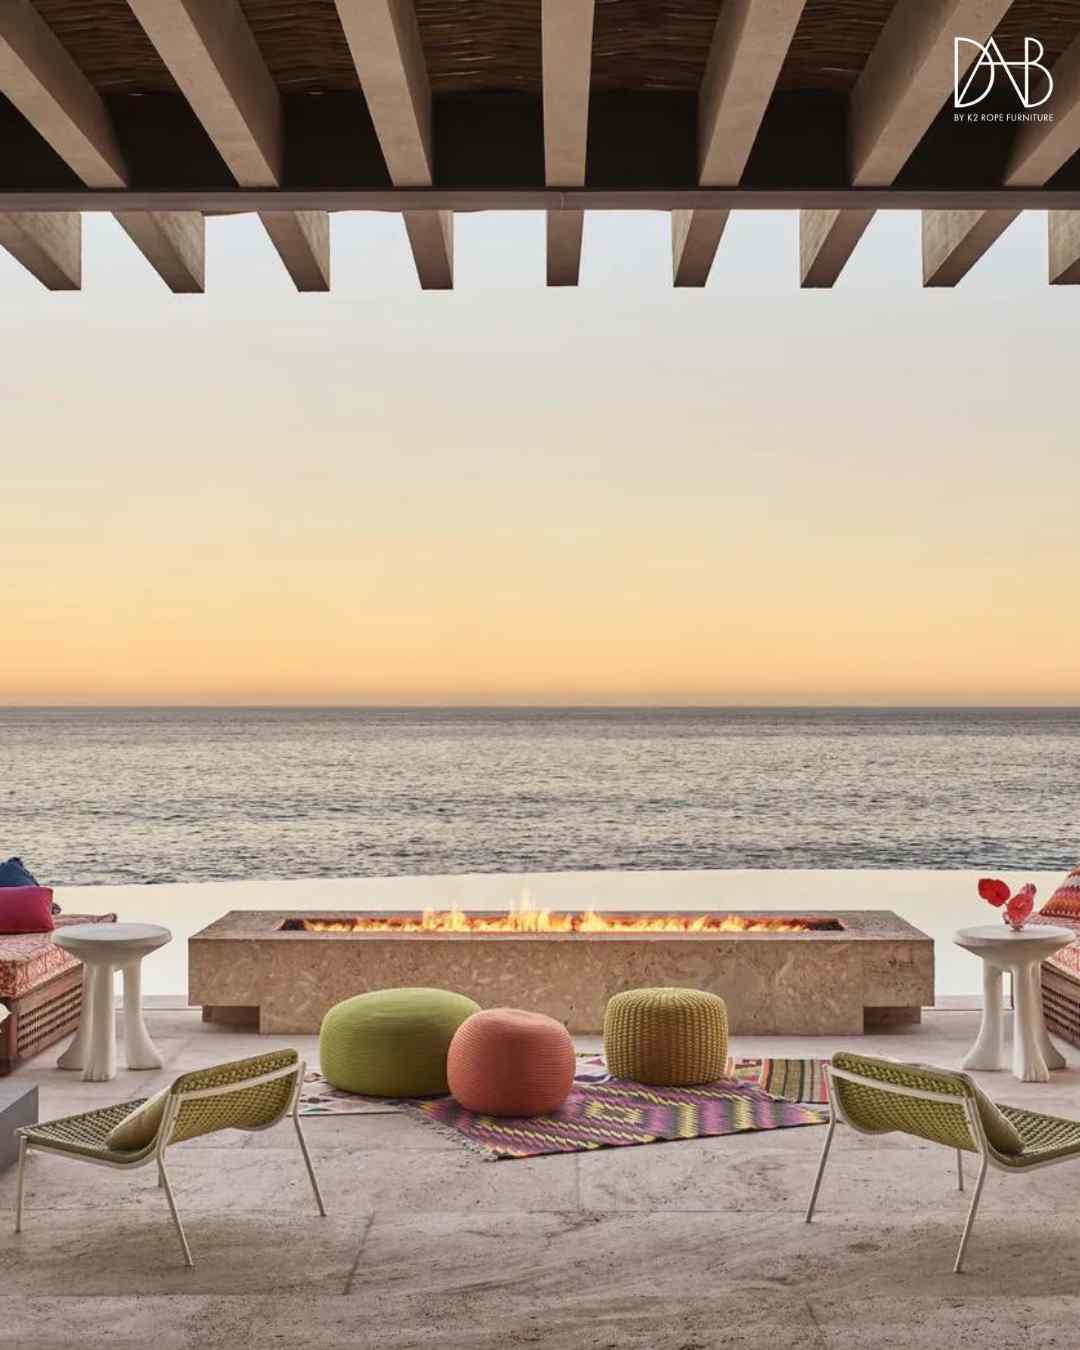 Embrace modern living with resort furniture trends